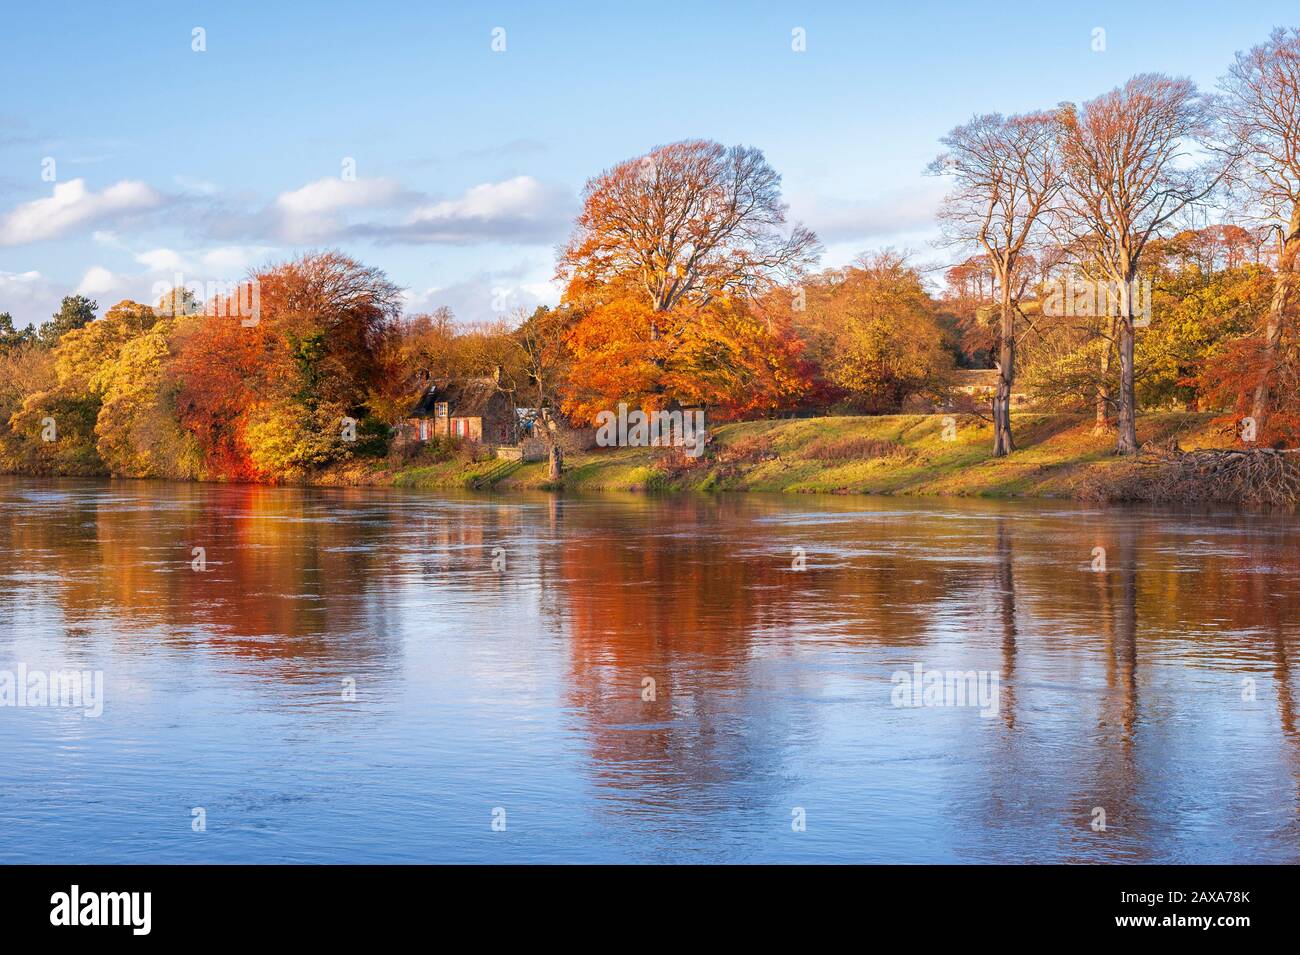 View from Tyne Green of Autumn colour on trees round an old cottage on the banks of the River Tyne near Hexham in Northumberland North East England Stock Photo